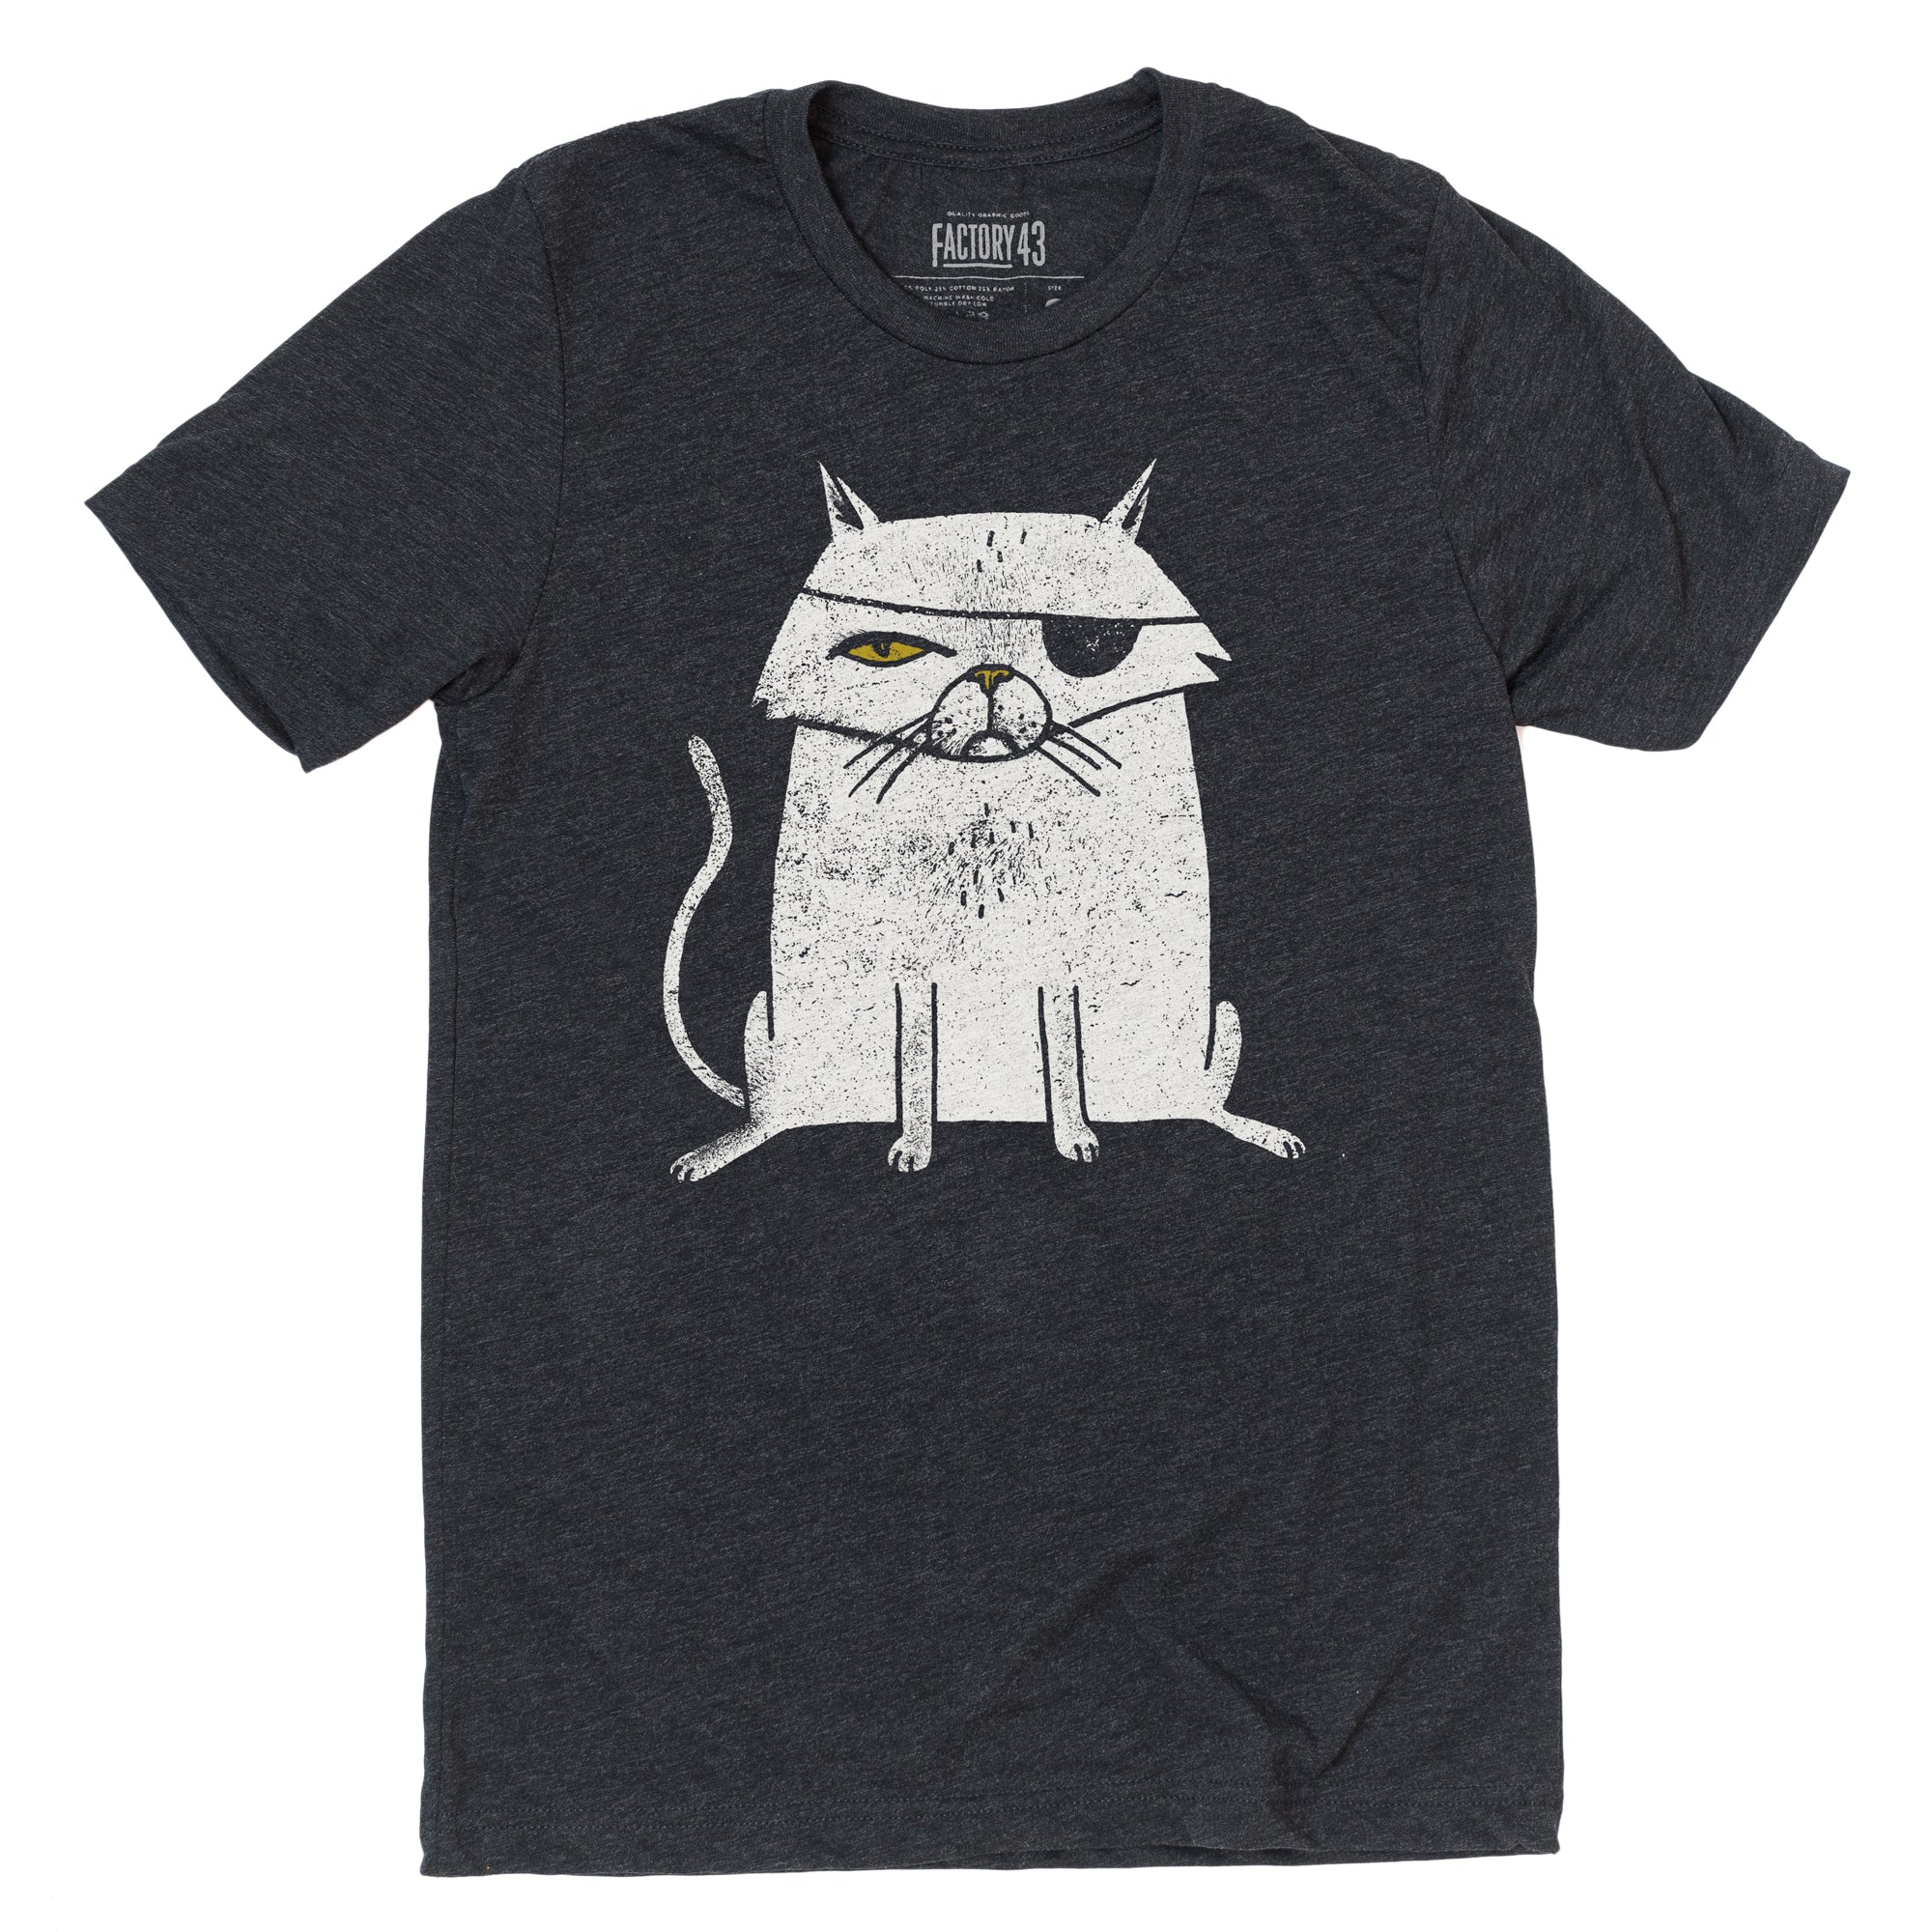 Super soft gray black mens/womens graphic tshirt of a one eyed cat with an eyepatch. The cat looks like a pirate or an evil Bond villian. Factory 43 is a graphic design studio that makes art with a PNW vibe that reflects their Midwest/Southern roots. This cotton/polyester/rayon shirt printed in Seattle, Washington. The cat is white with a yellow eye and nose.